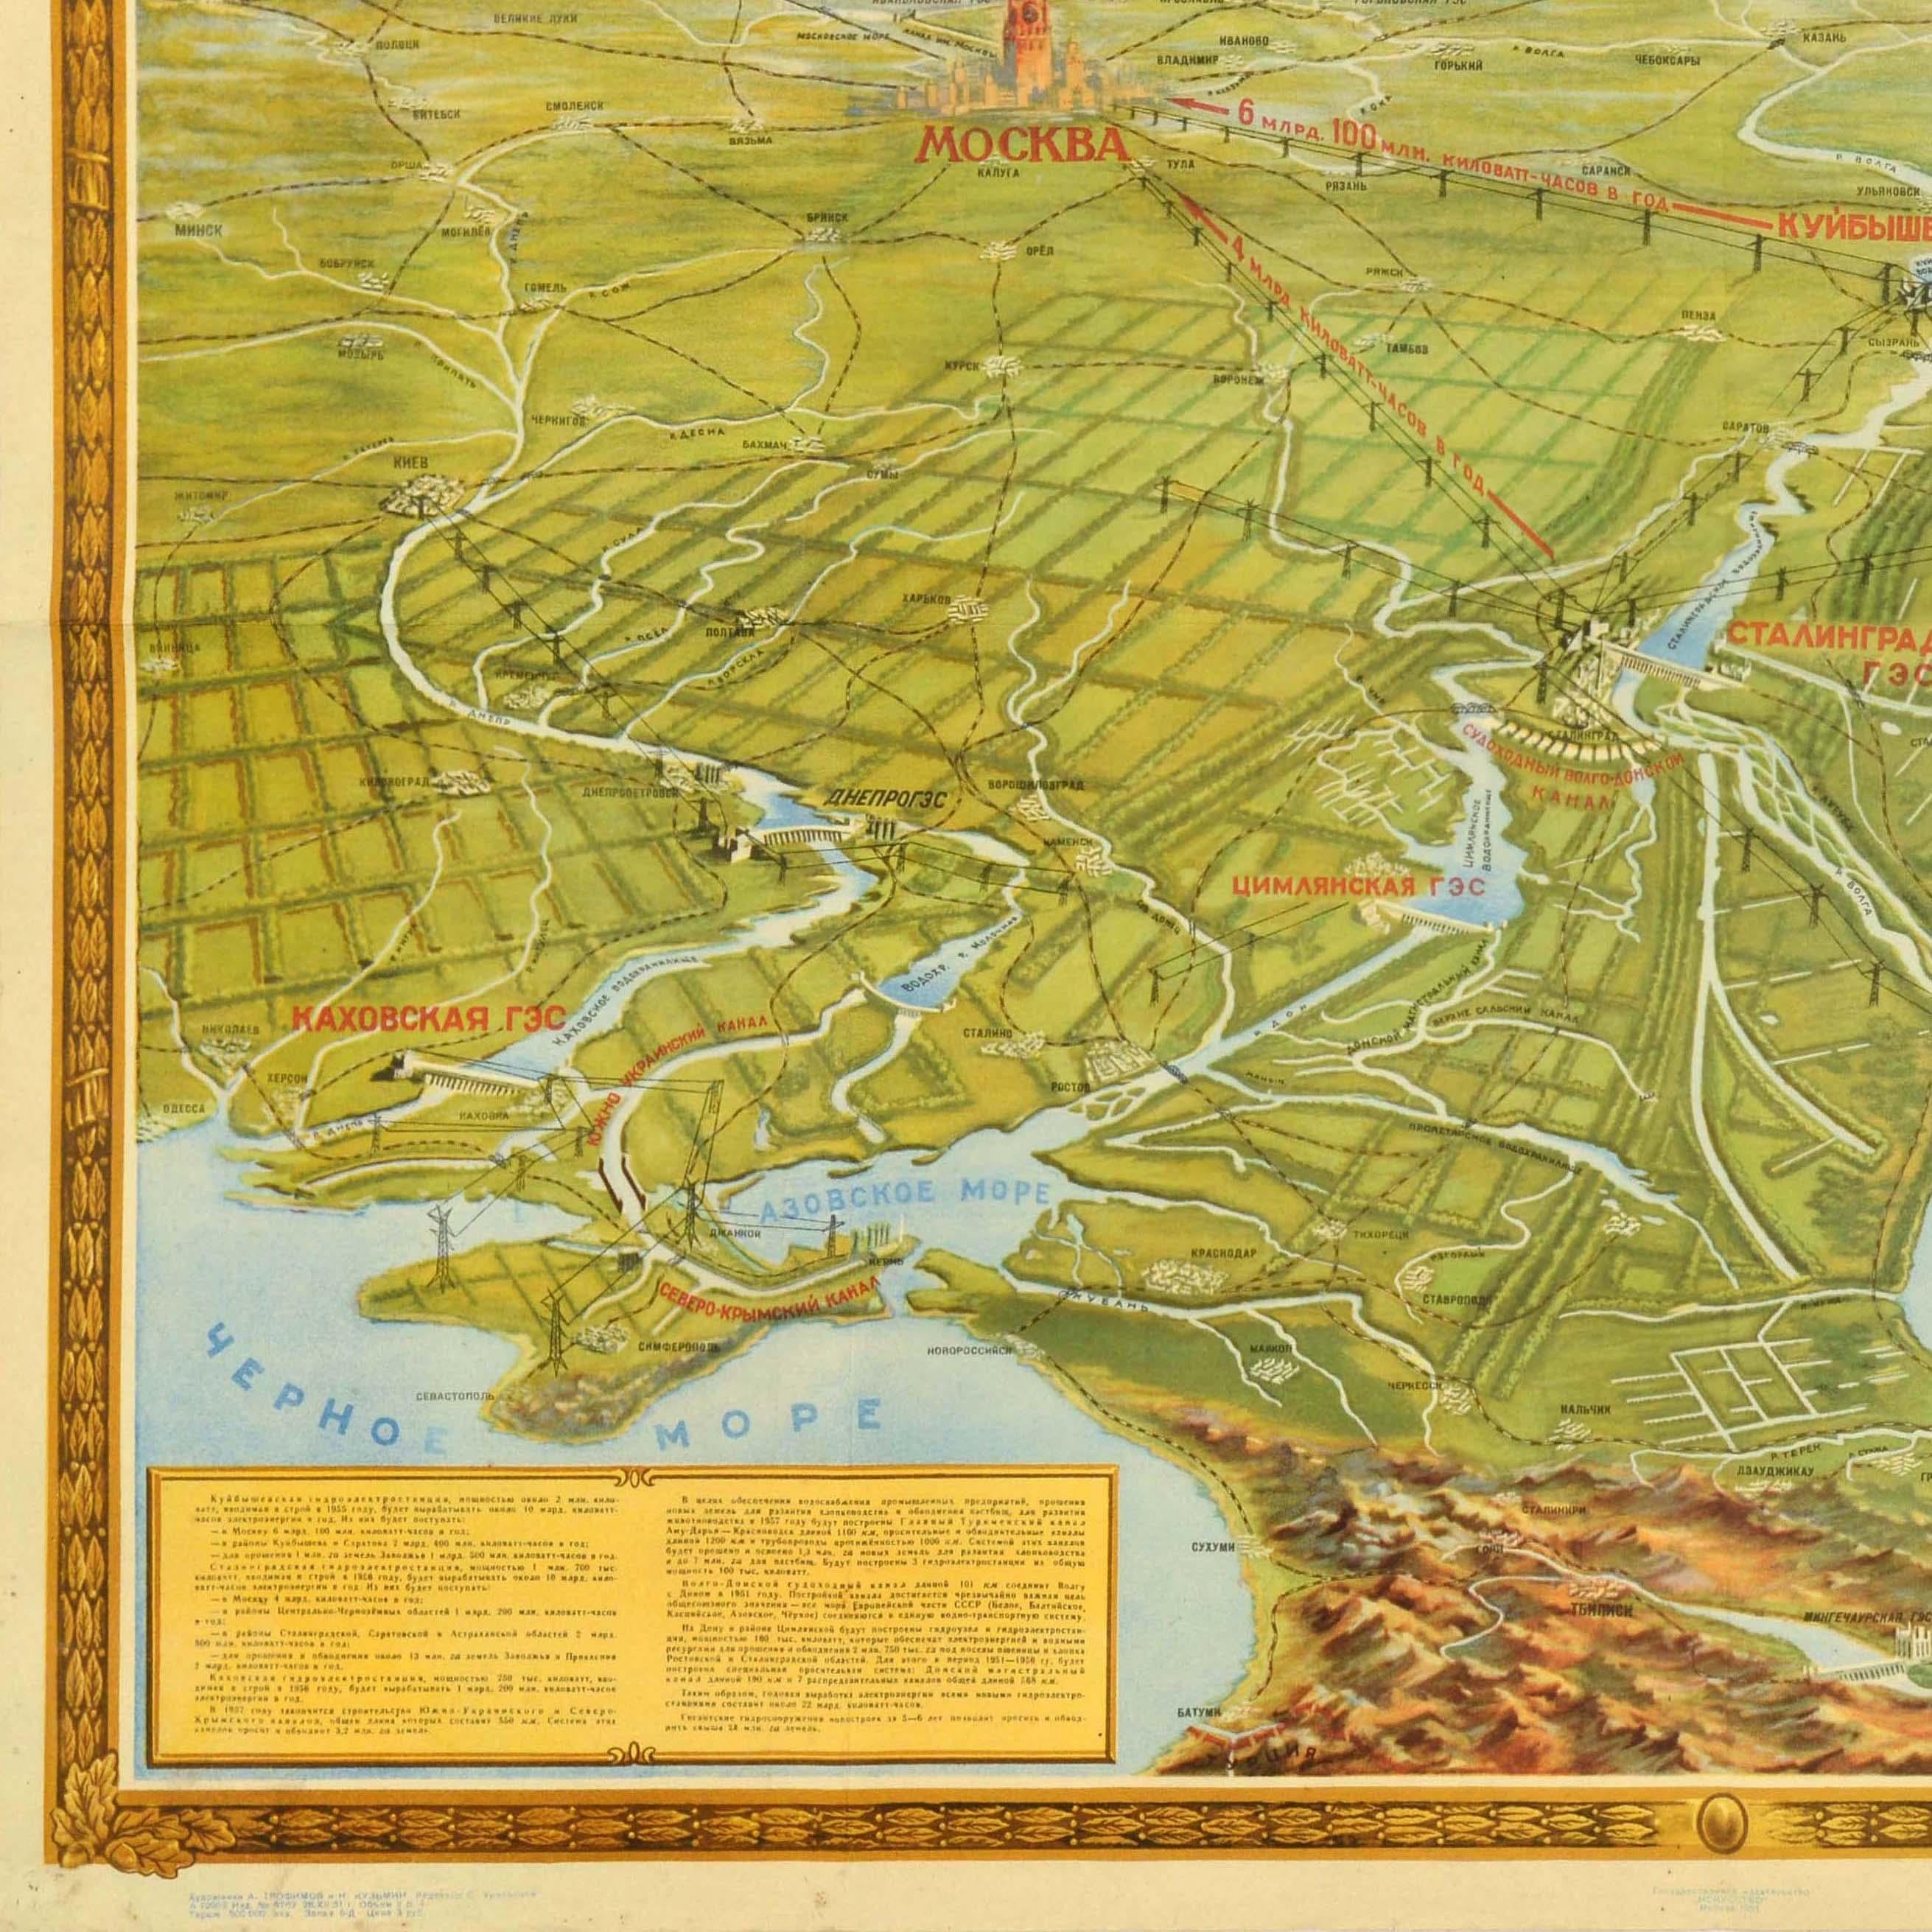 Original Vintage Soviet Propaganda Poster Great Buildings Of Communism Map USSR In Good Condition For Sale In London, GB